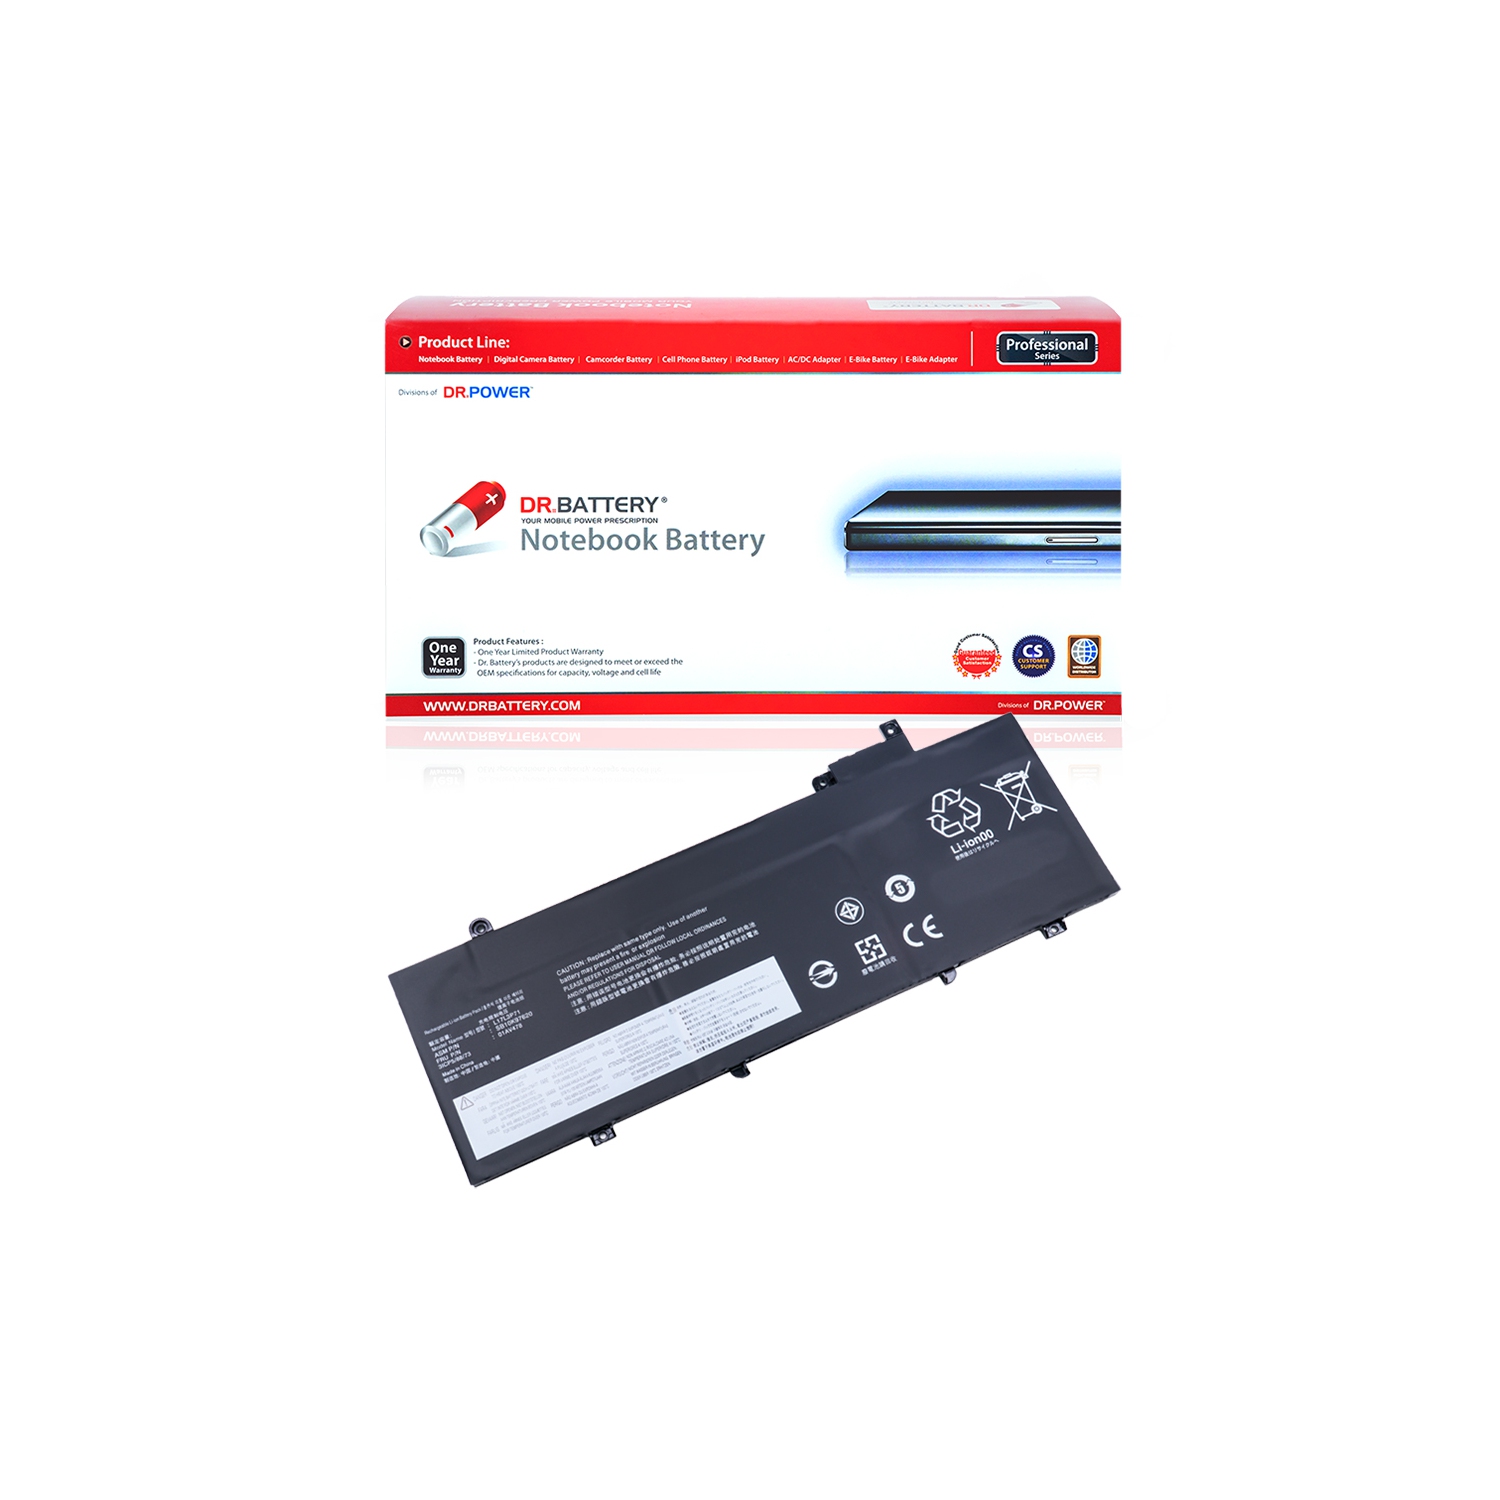 DR. BATTERY - Replacement for Lenovo ThinkPad T480s 20L8S1PU0K / 20L8S1PU0L / 20L8S1R70D / L17L3P71 / L17M3P71 / L17S3P71 [11.58V / 4920mAh / 57Wh] ***Free Shipping***